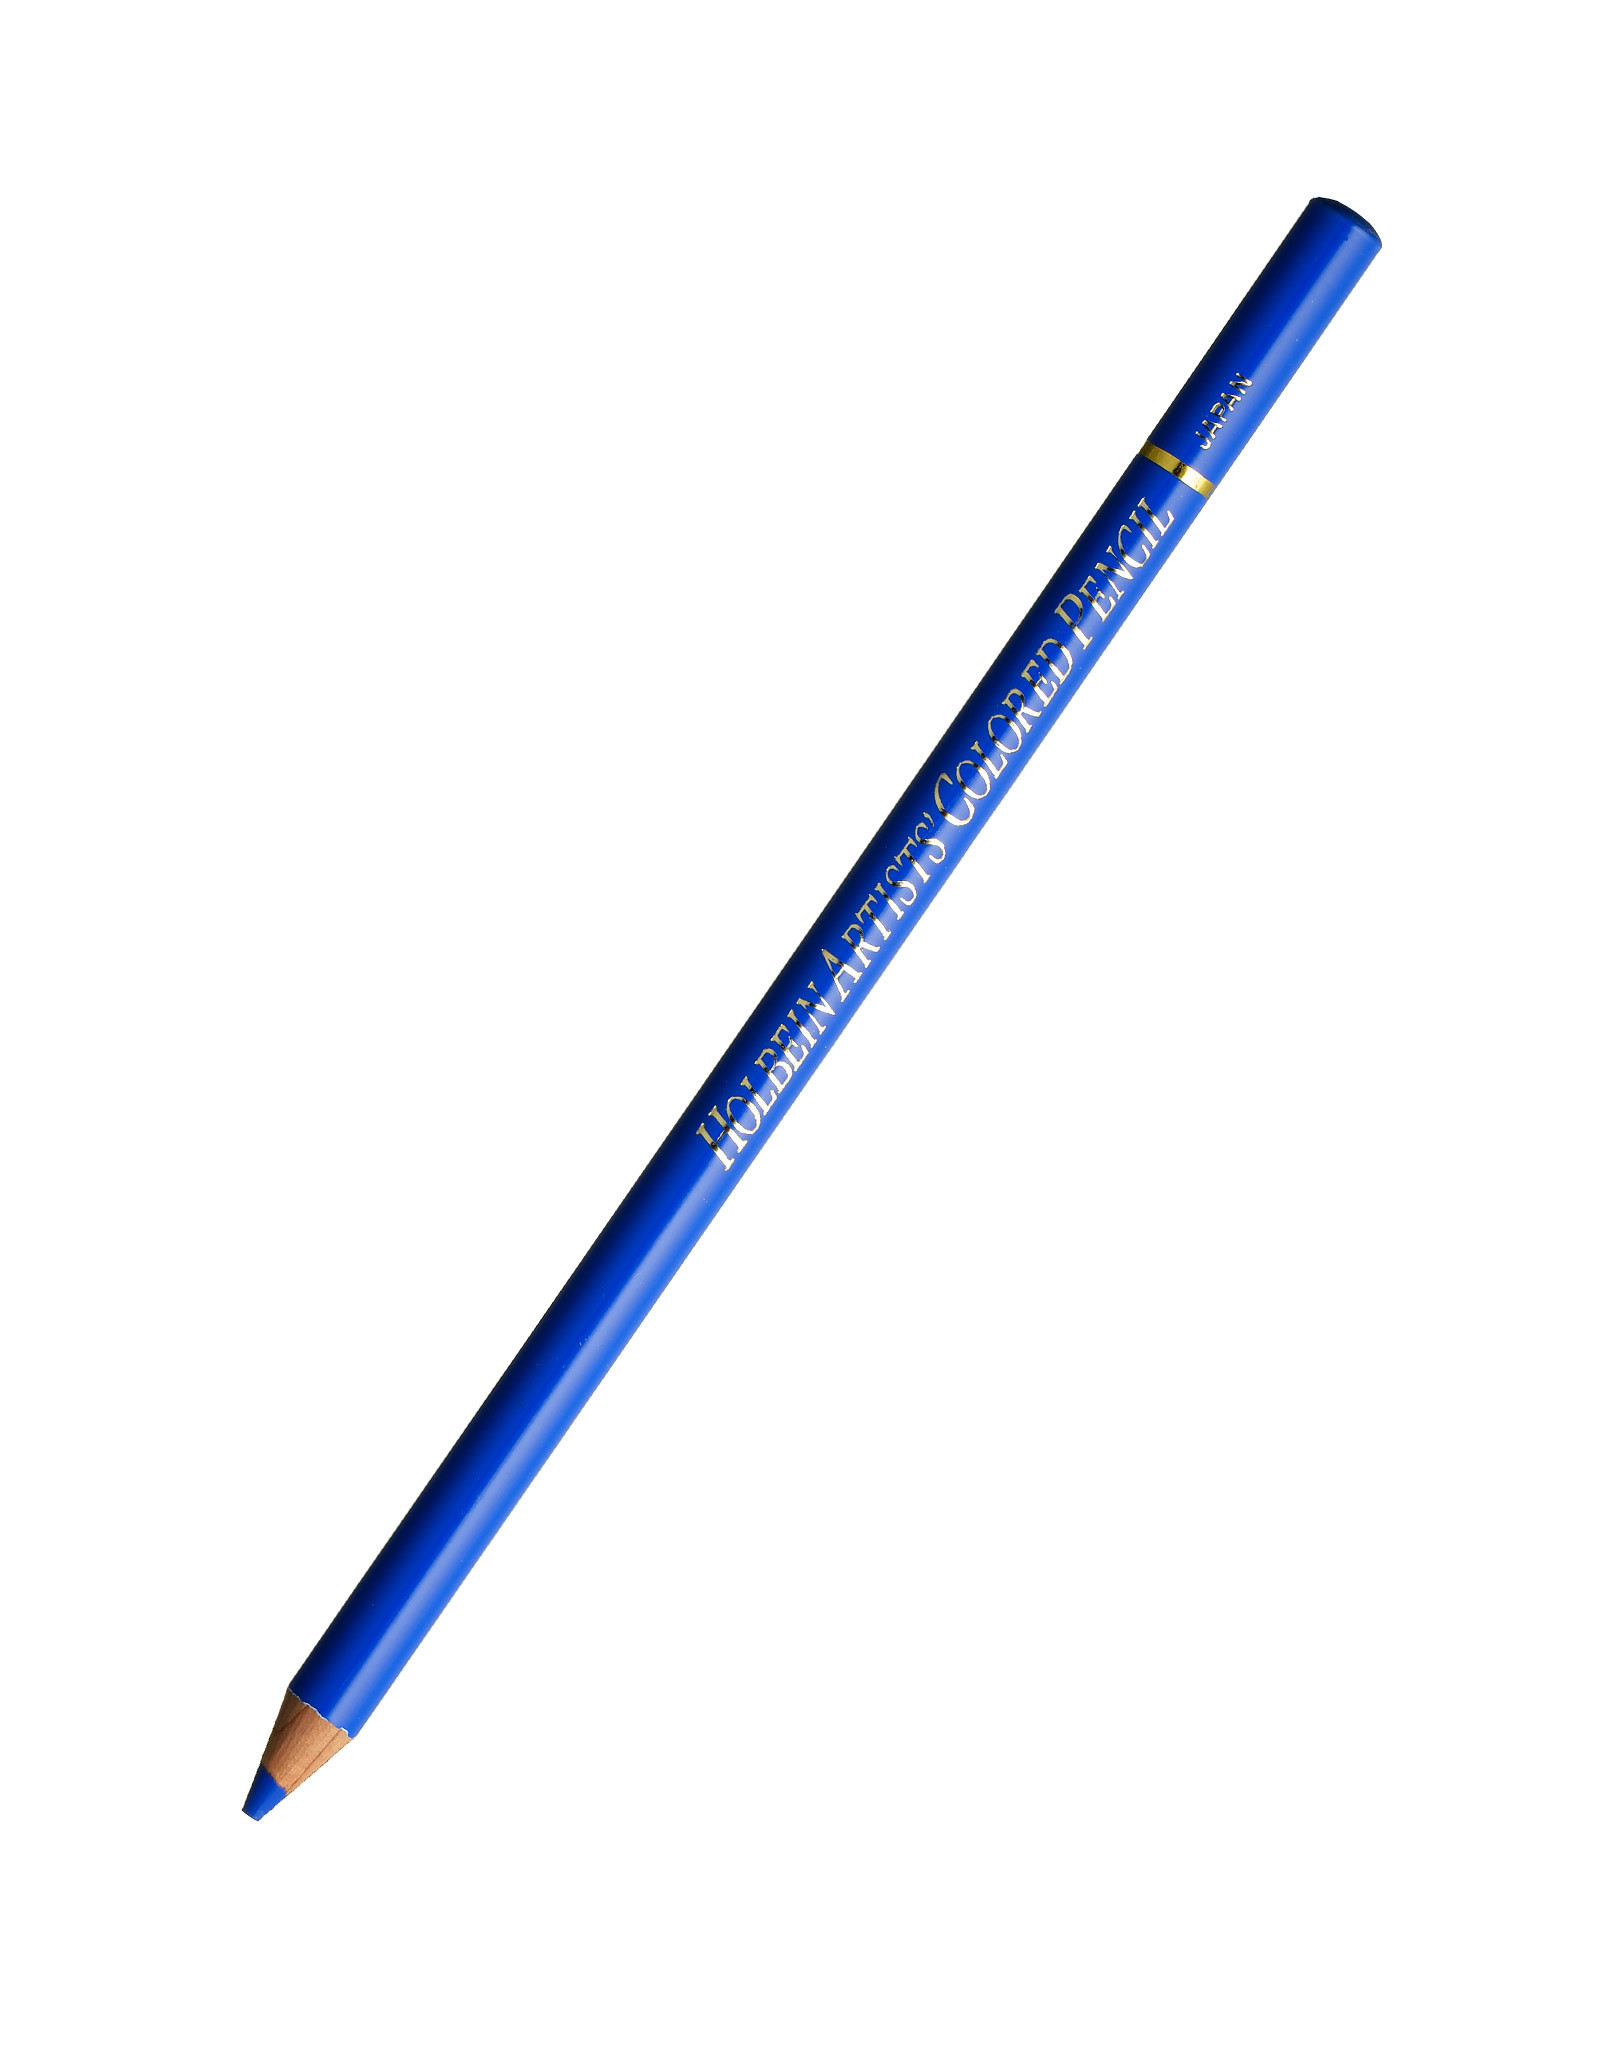 HOLBEIN Holbein Colored Pencil, Cobalt Blue